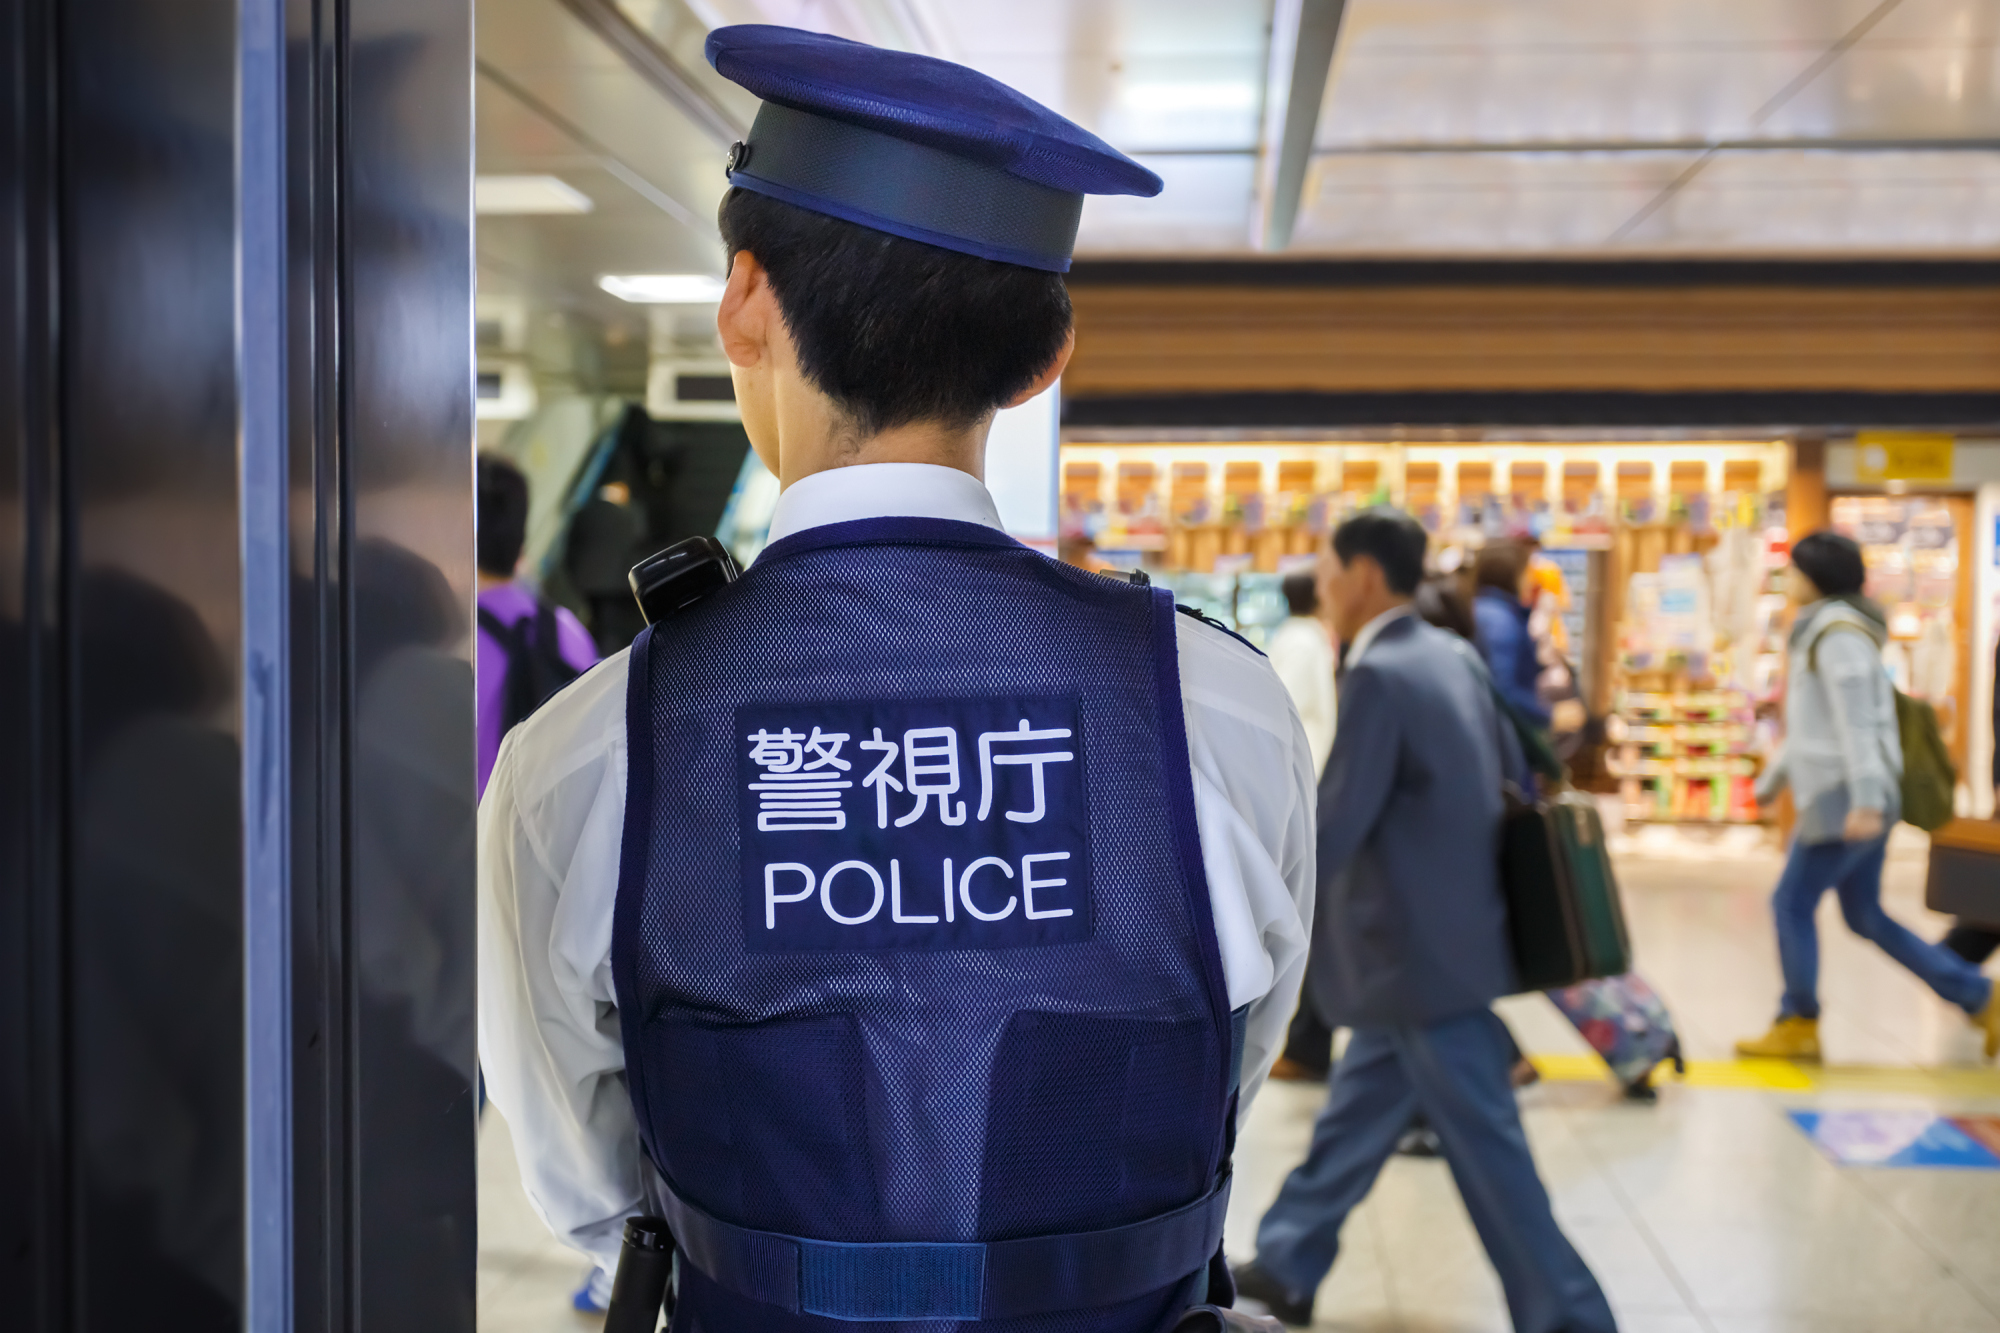 The overall number of cases of crime has consistently declined in Japan after hitting a peak of 2.85 million in 2002. | GETTY IMAGES